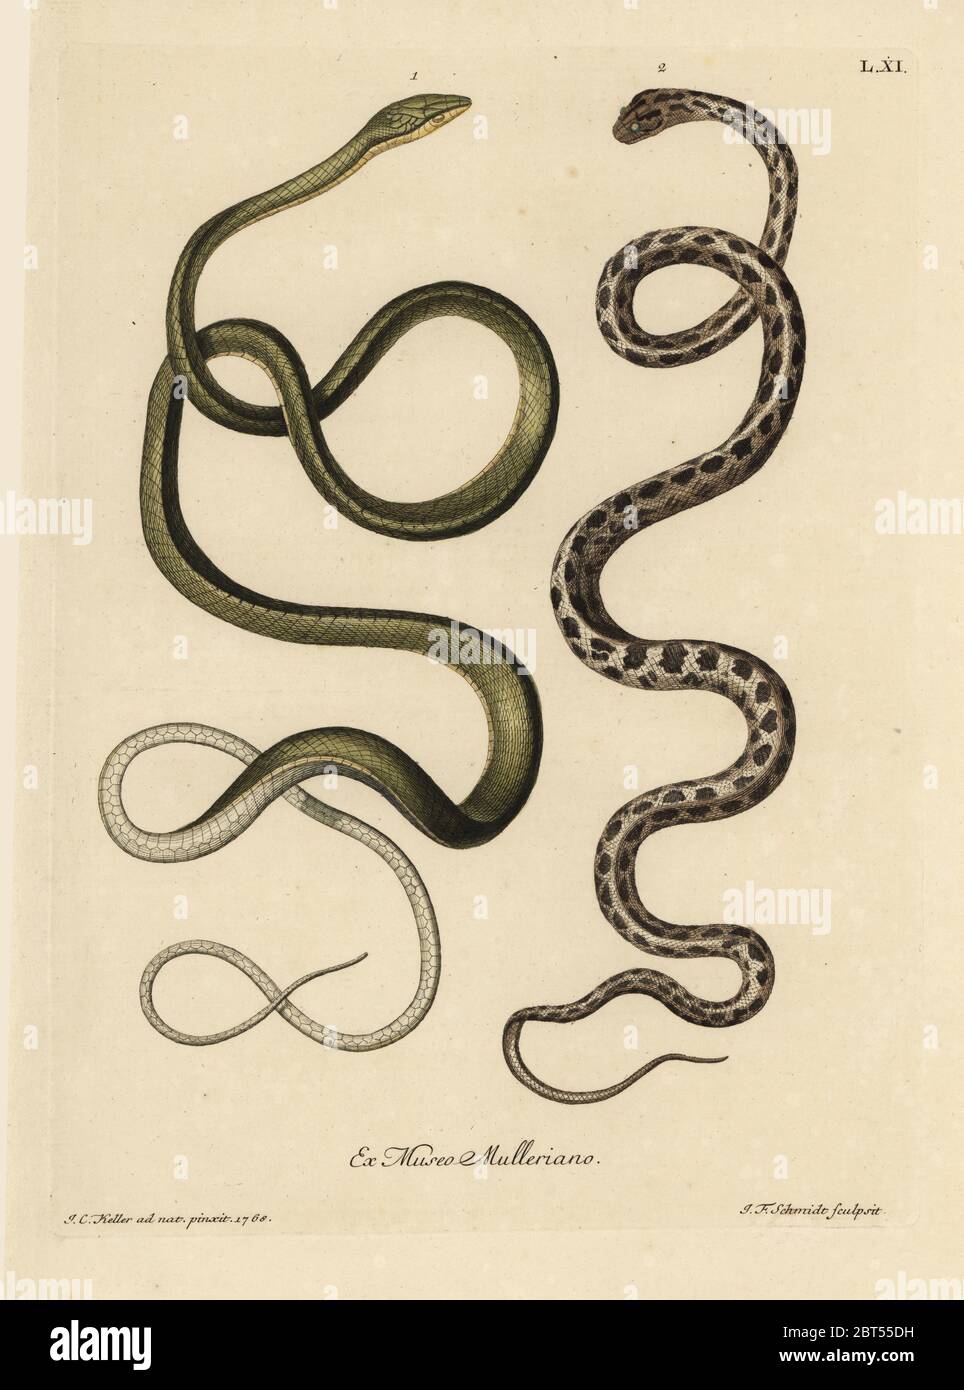 Two Suriname snakes: Green snake (Malayan green whipsnake, Ahaetulla mycterizans?) and checkered garter snake, Thamnophis marcianus. Le serpent verd de Surinam, Coluber mycterizans, serpent blanc elegamment tachete de noir en echiquier. Handcoloured copperplate engraving by Johann Friedrich Schmidt after an illustration from nature by Johann Christoph Keller from Georg Wolfgang Knorr's Deliciae Naturae Selectae of Kabinet van Zeldzaamheden der Natuur, Blusse and Son, Nuremberg, 1771. Specimens from a Wunderkammer or Cabinet of Curiosities owned by Dr. Christoph Jacob Trew in Nuremberg. Stock Photo